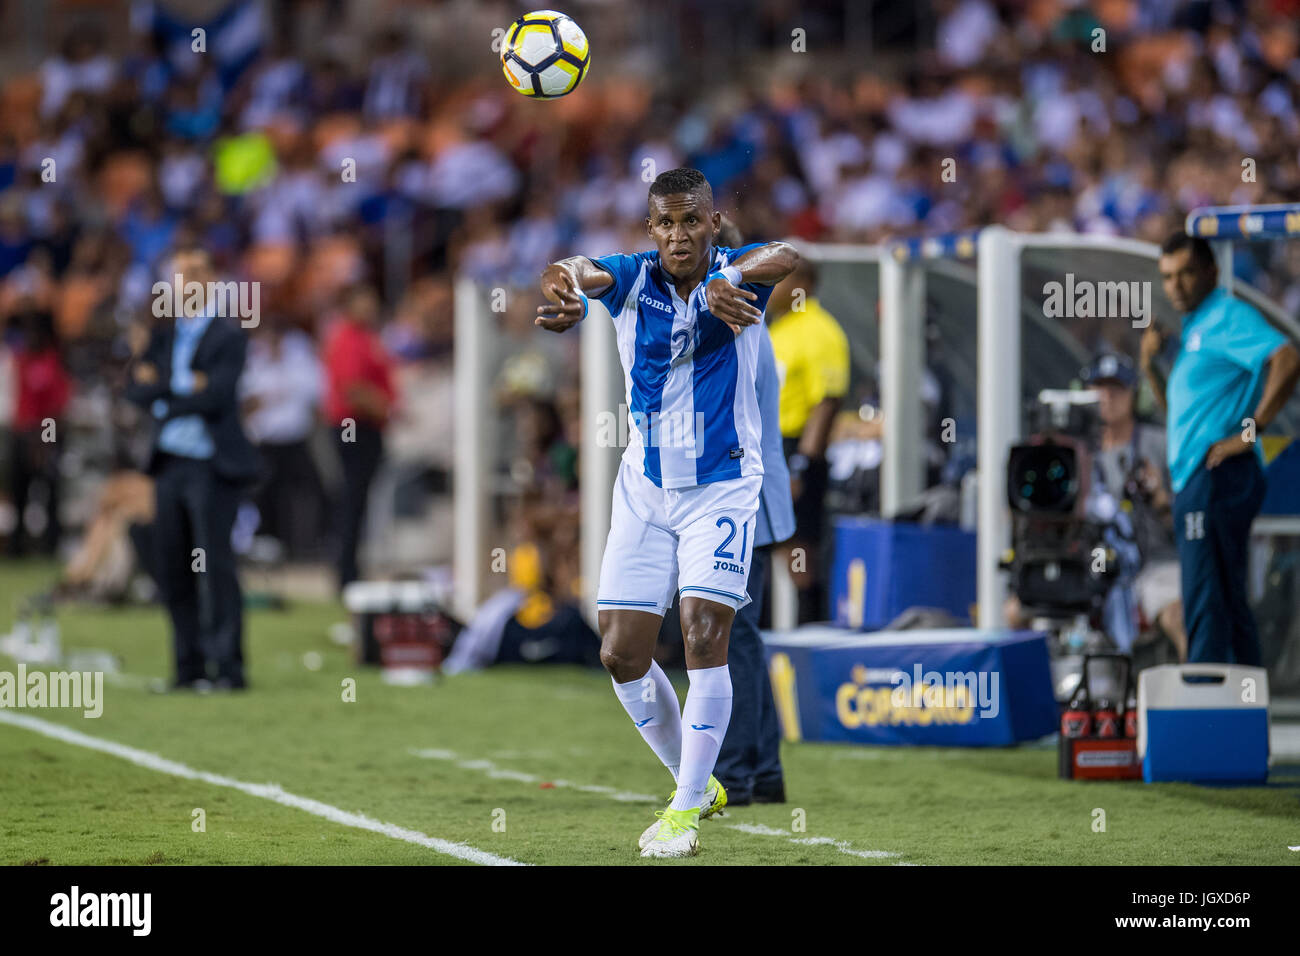 Houston, Texas, USA. 11th July, 2017. Honduras defender Brayan Beckeles (21) throws the ball in during the 1st half of an international CONCACAF Gold Cup soccer match between Honduras and French Guiana at BBVA Compass Stadium in Houston, TX on July 11th, 2017. The game ended in a 0-0 draw. Credit: Trask Smith/ZUMA Wire/Alamy Live News Stock Photo